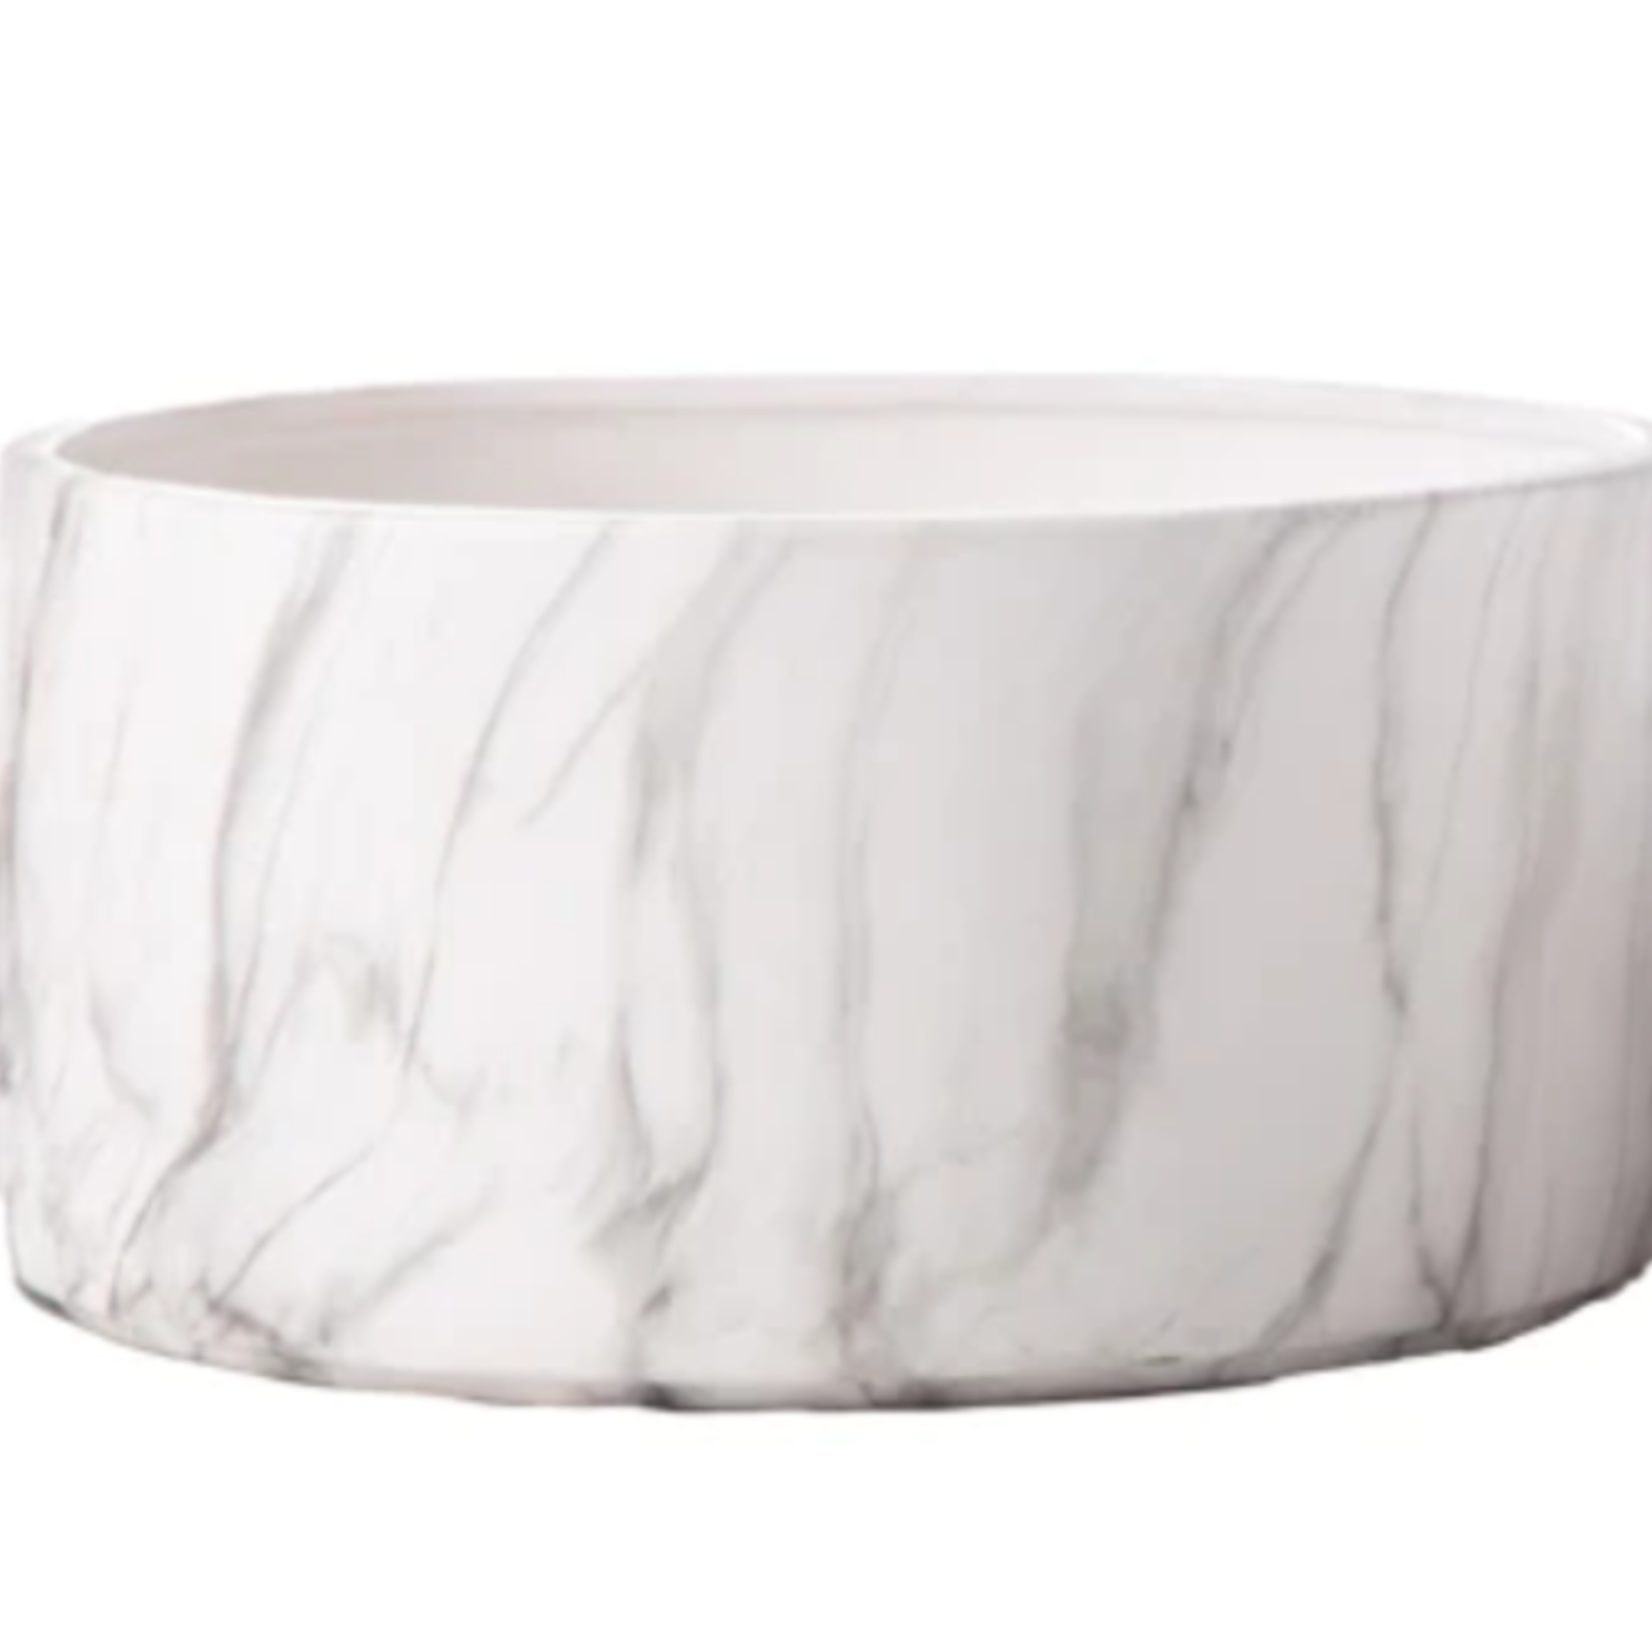 7”H X 13.5” LOW CYLINDER WHITE MARBLE WITH GOLD